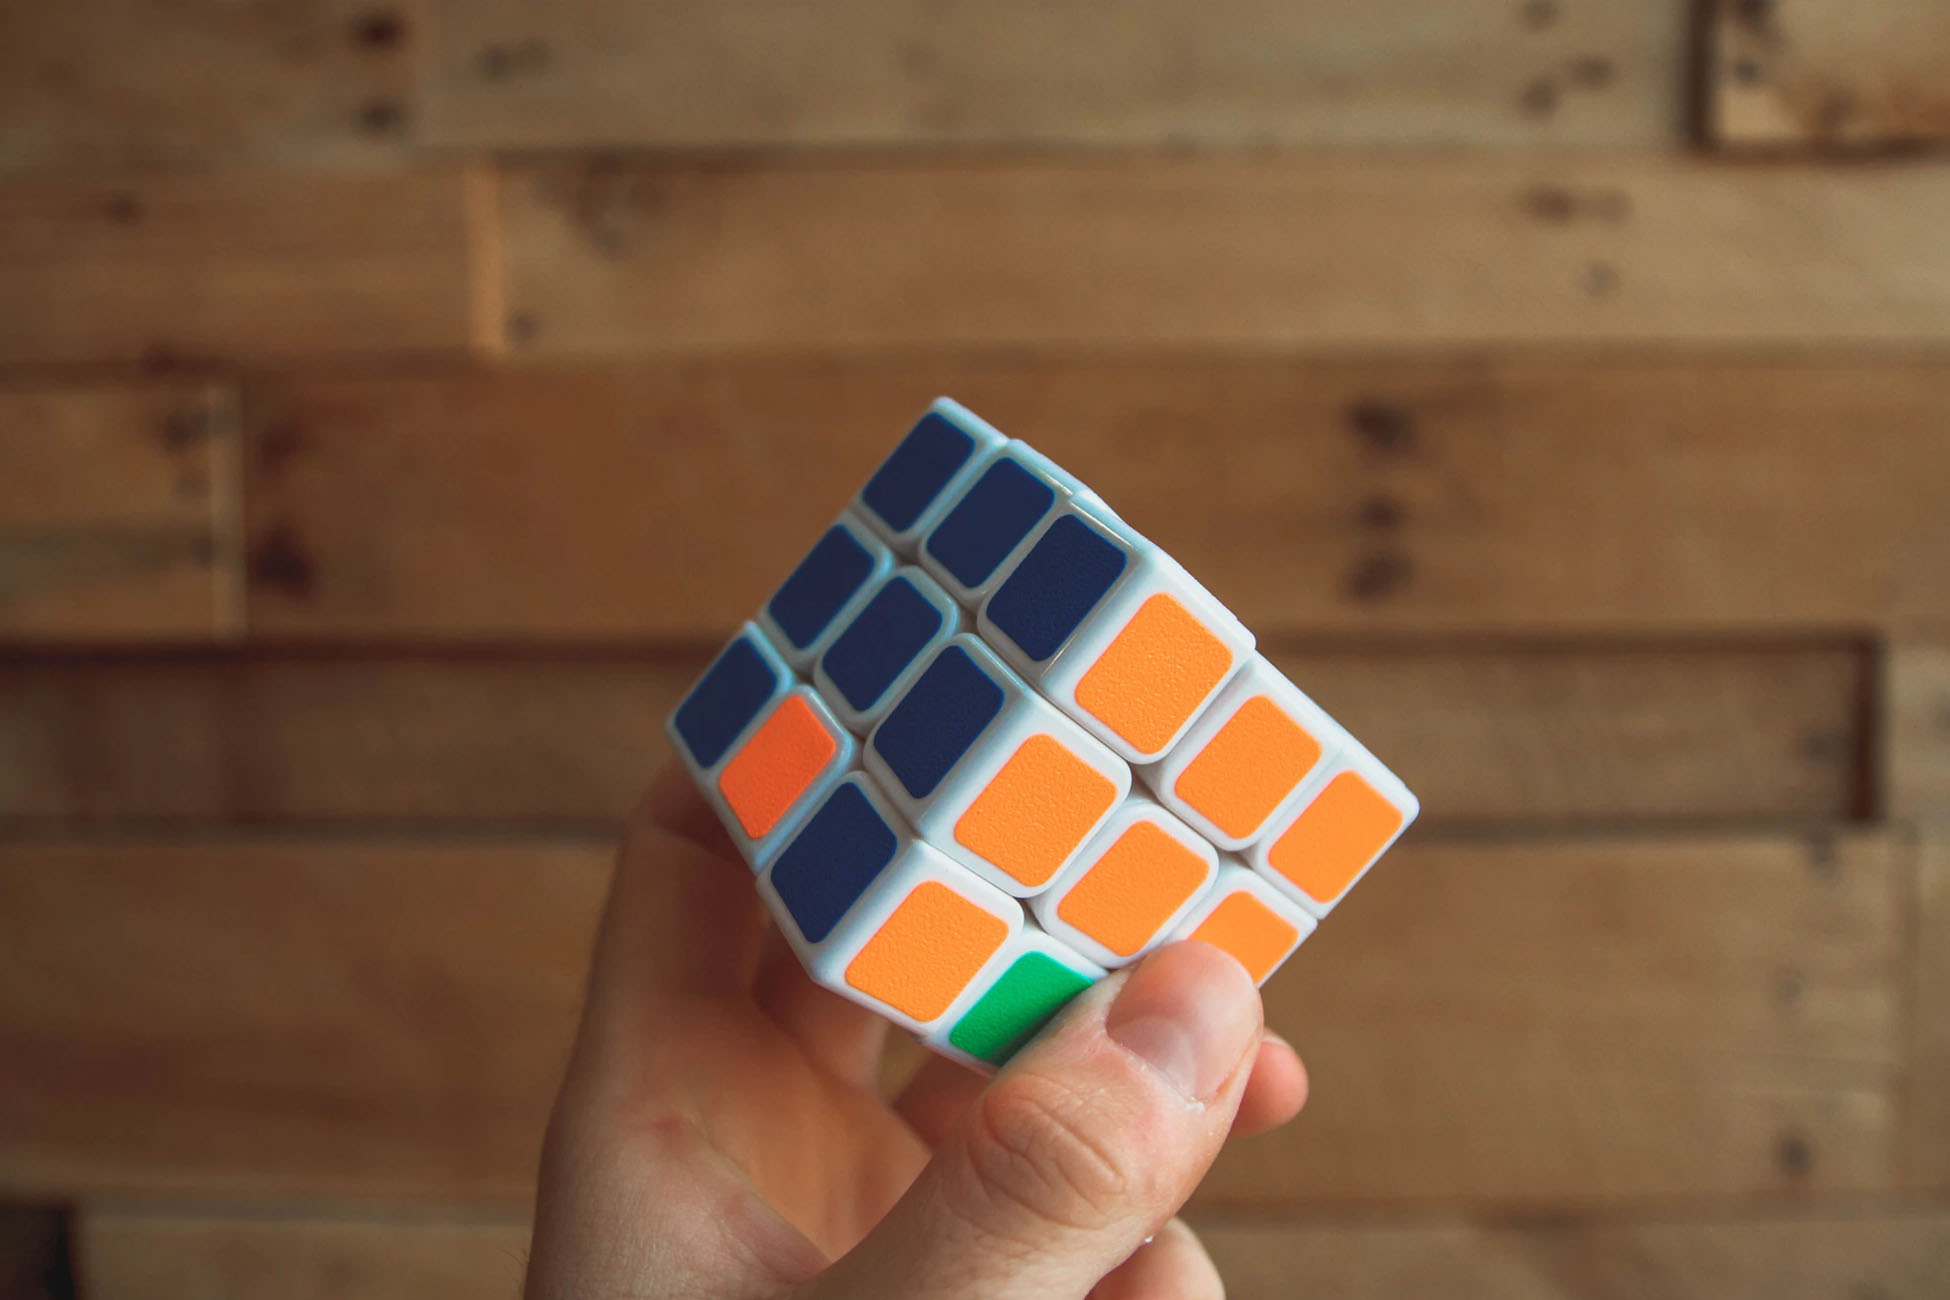 Unfinished Rubik's cube in a hand